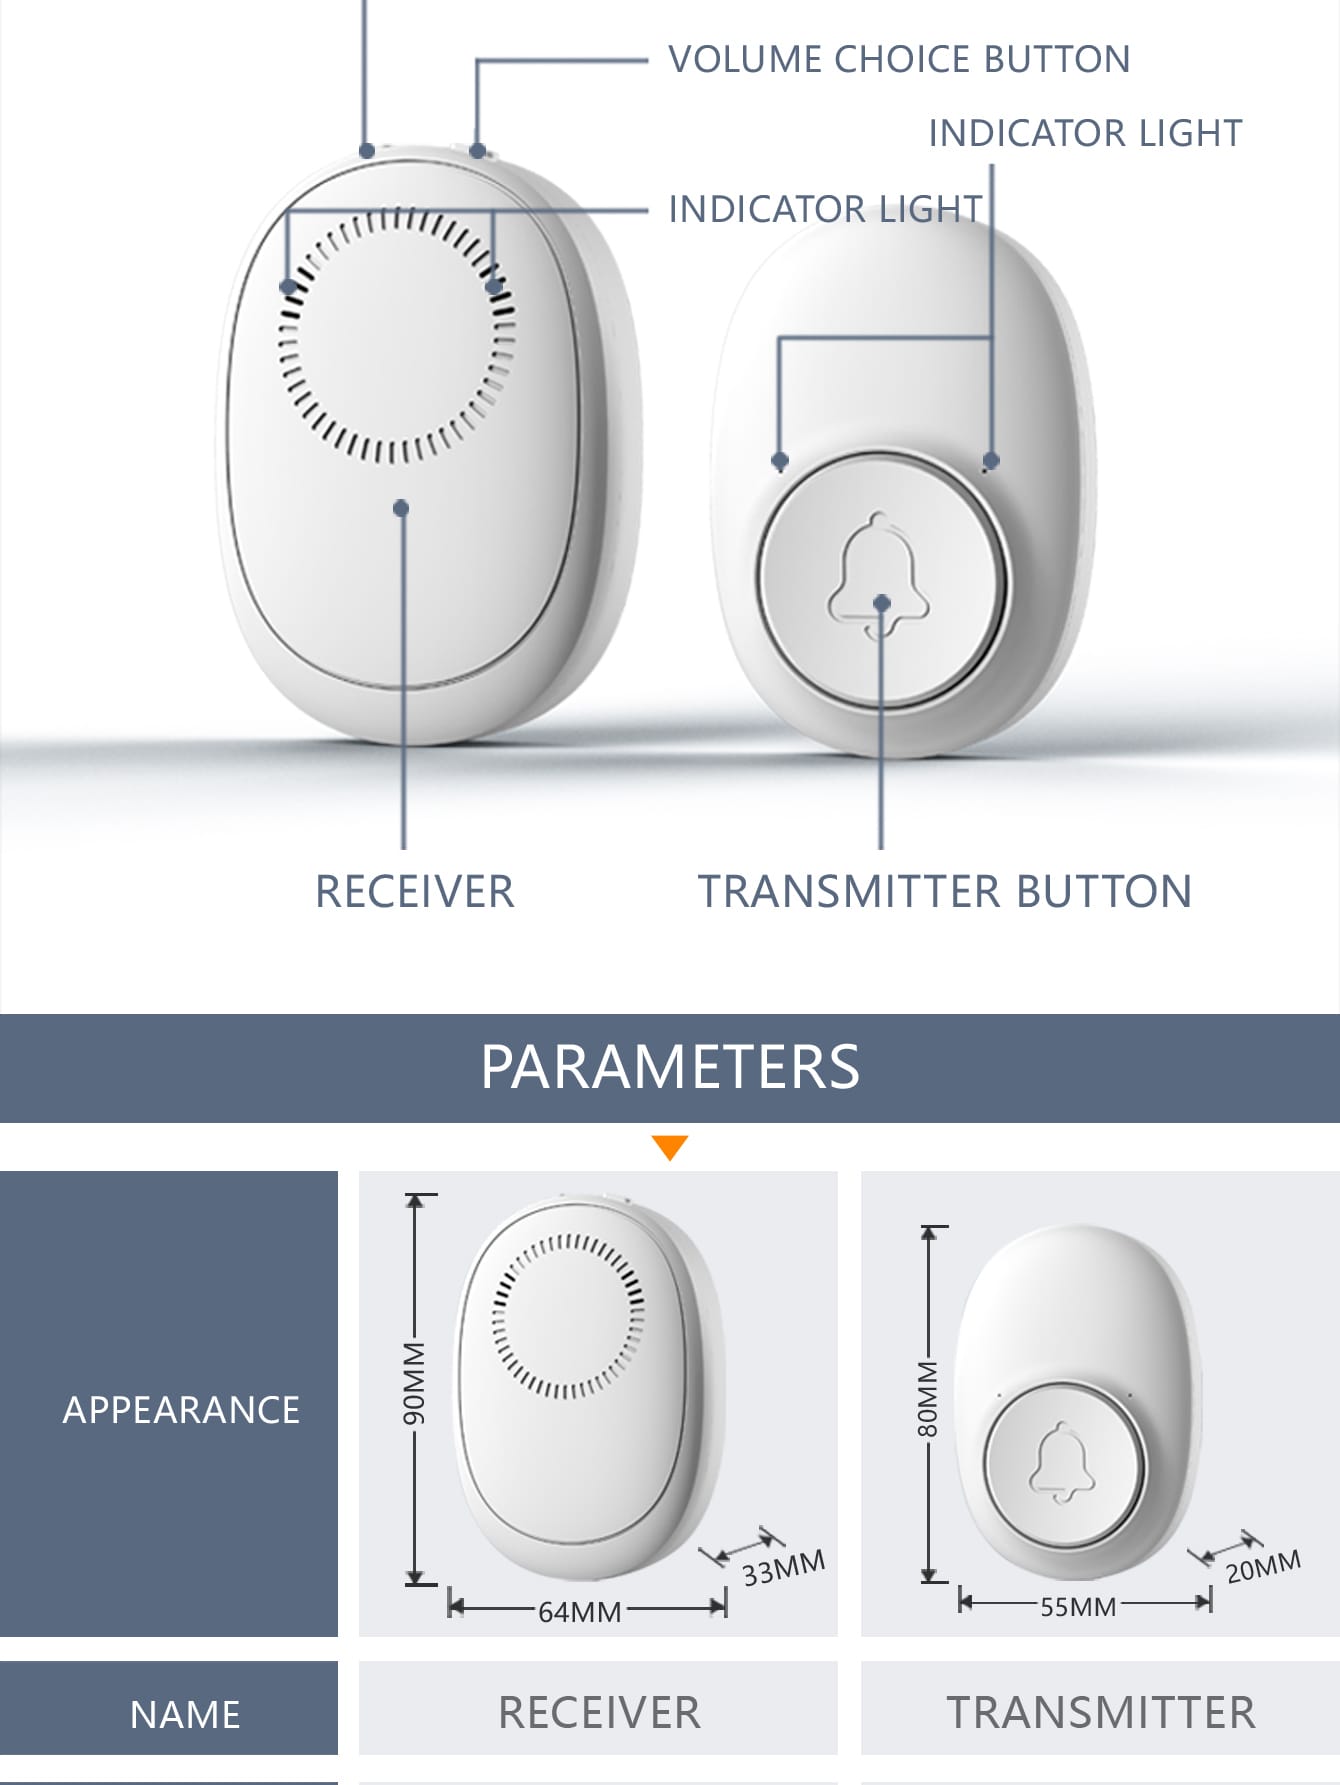 Wireless Intelligent Doorbell With Remote Control Button And Waterproof Electronic Receiver, Including 1 Transmitter, 1 Receiver, 1 Battery, 1 User Manual, Double-sided Tape And 2 Screws, Suitable For Uk/us/eu Standards, Ideal For Elderly. Sleek--10